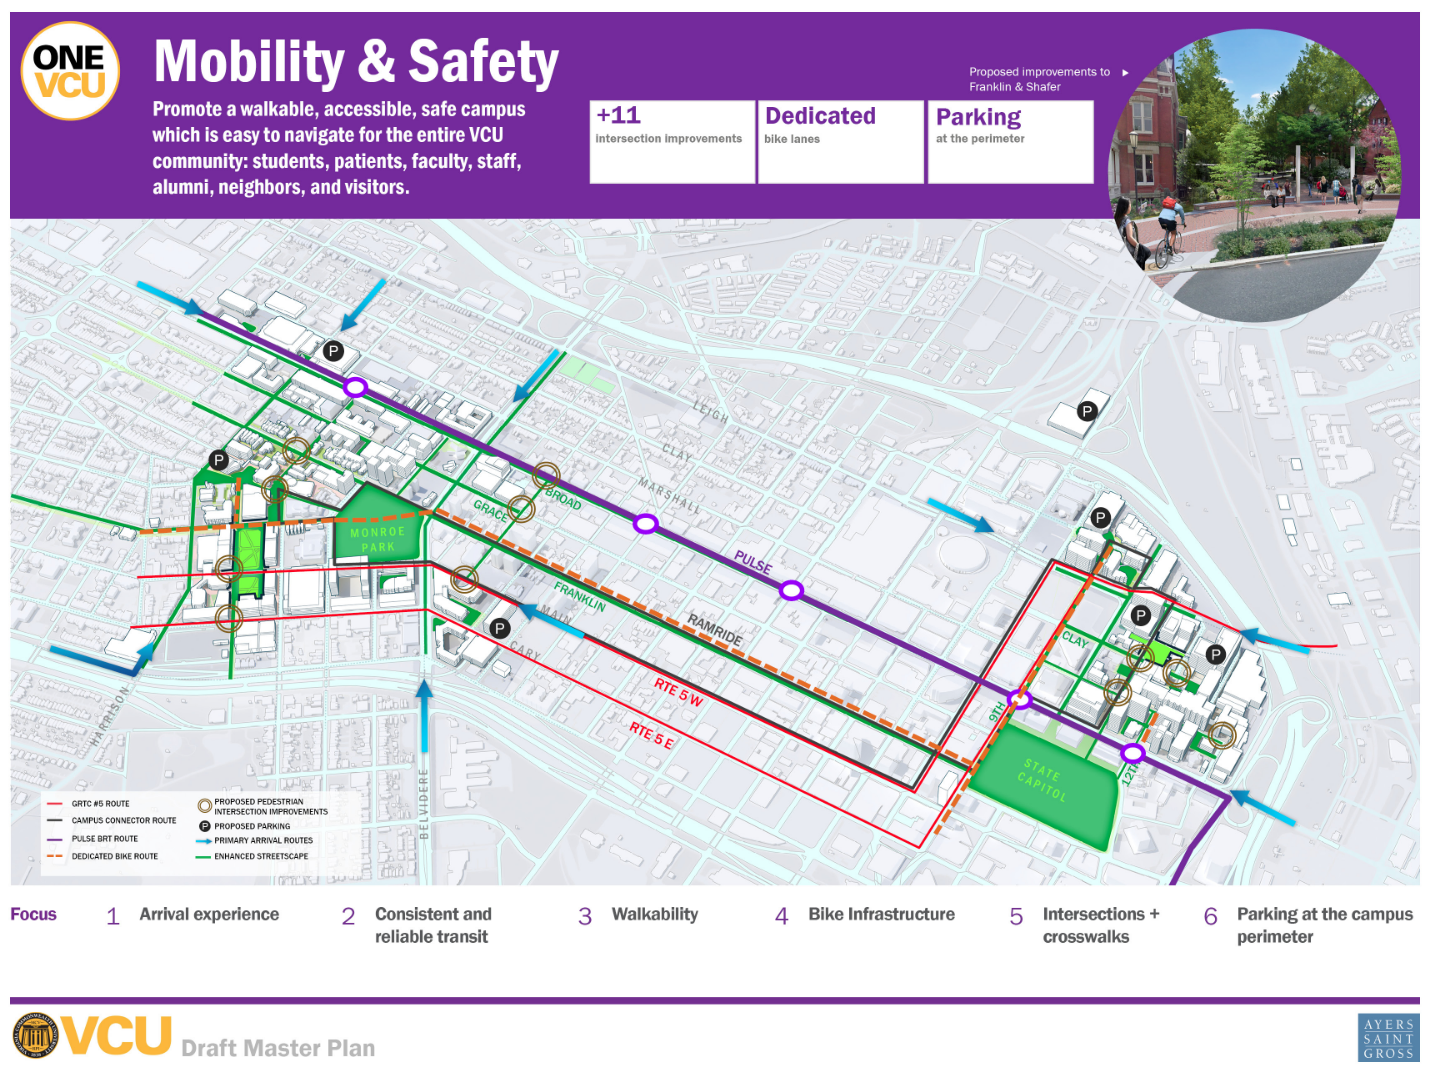 Several steps will be made to enhance mobility and safety on the Monroe Park and MCV campuses.